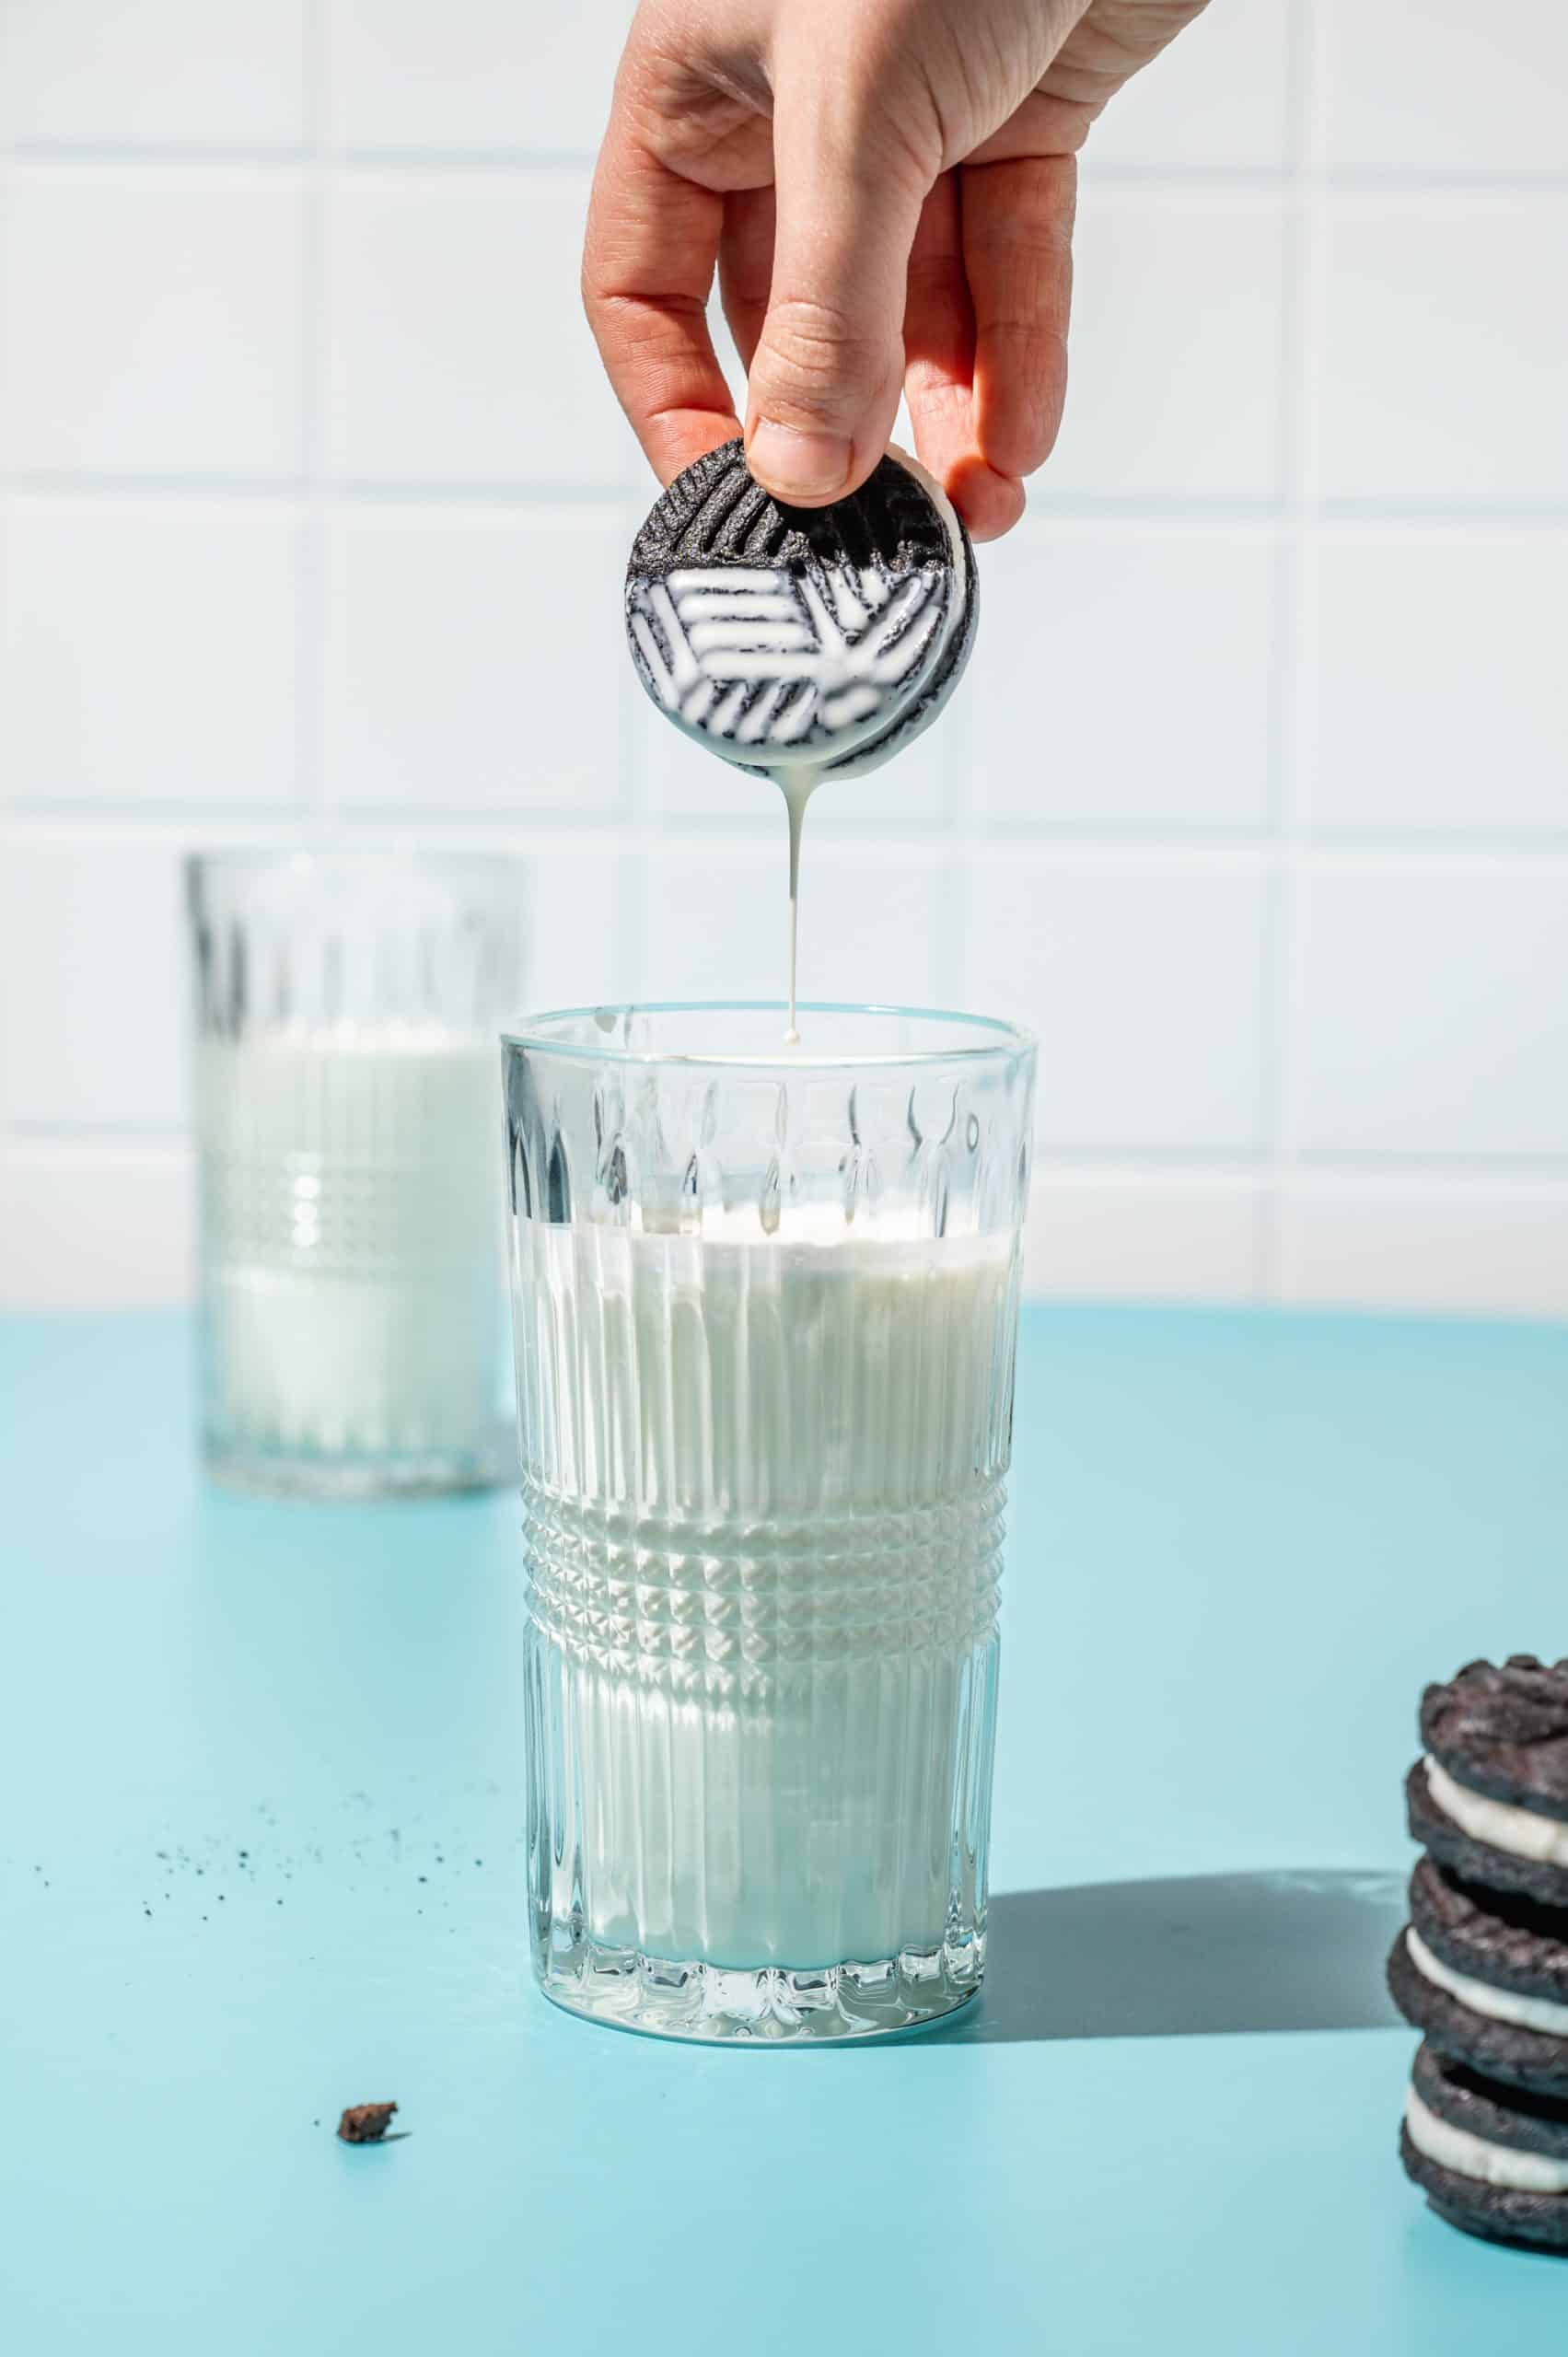 hand dipping a homemade oreo in a glass of milk, milk dripping off of cookie